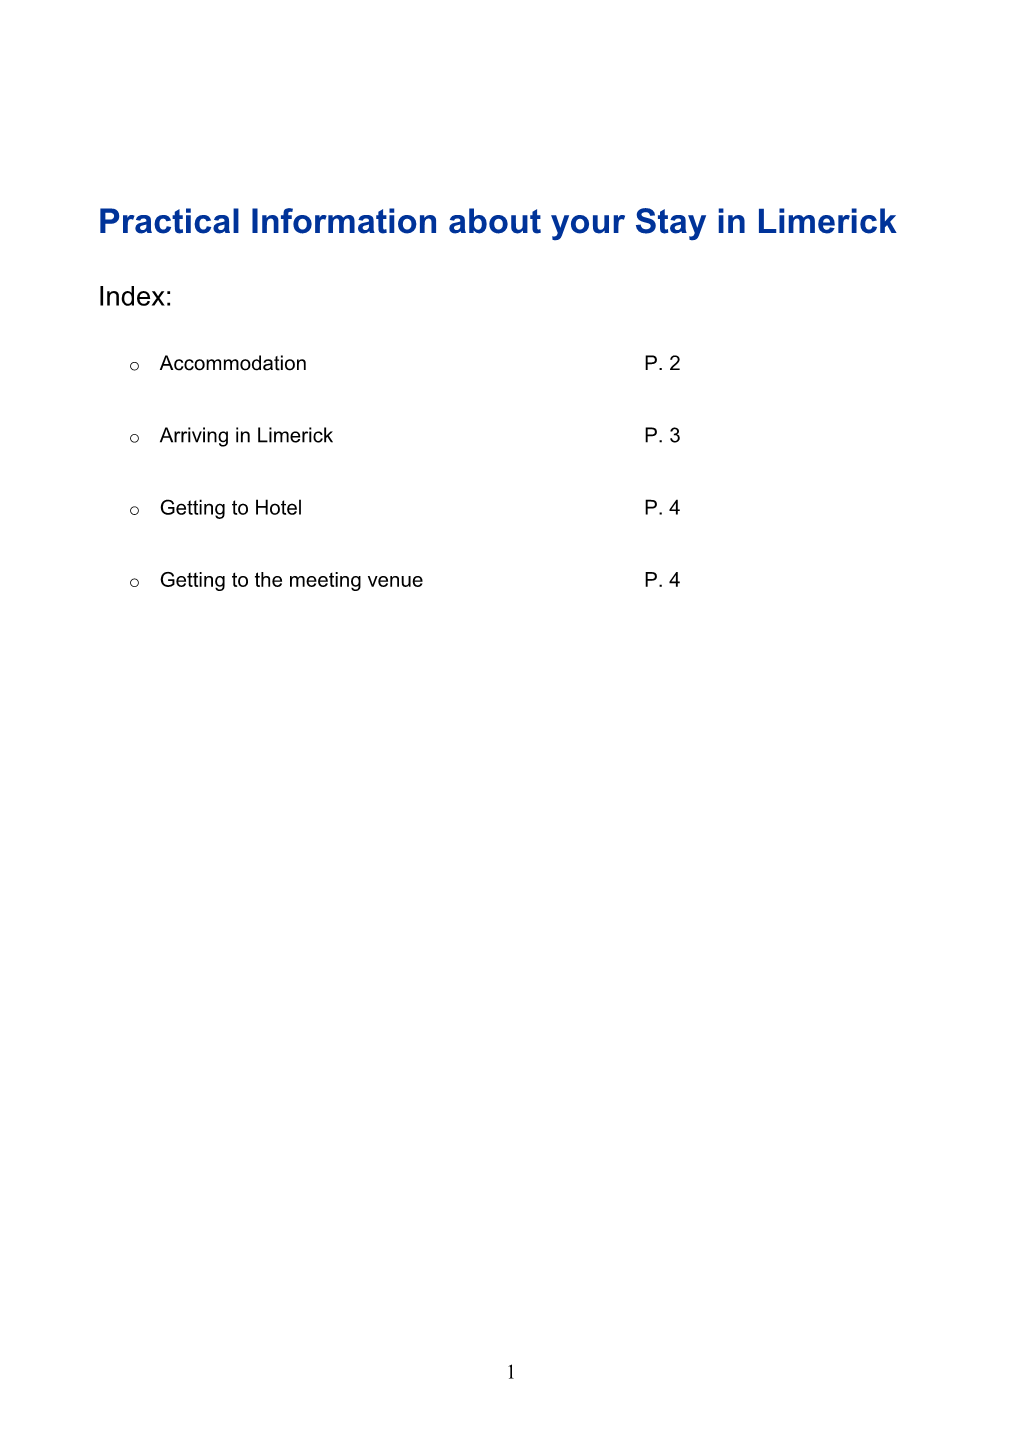 Practical Information About Your Stay in Limerick